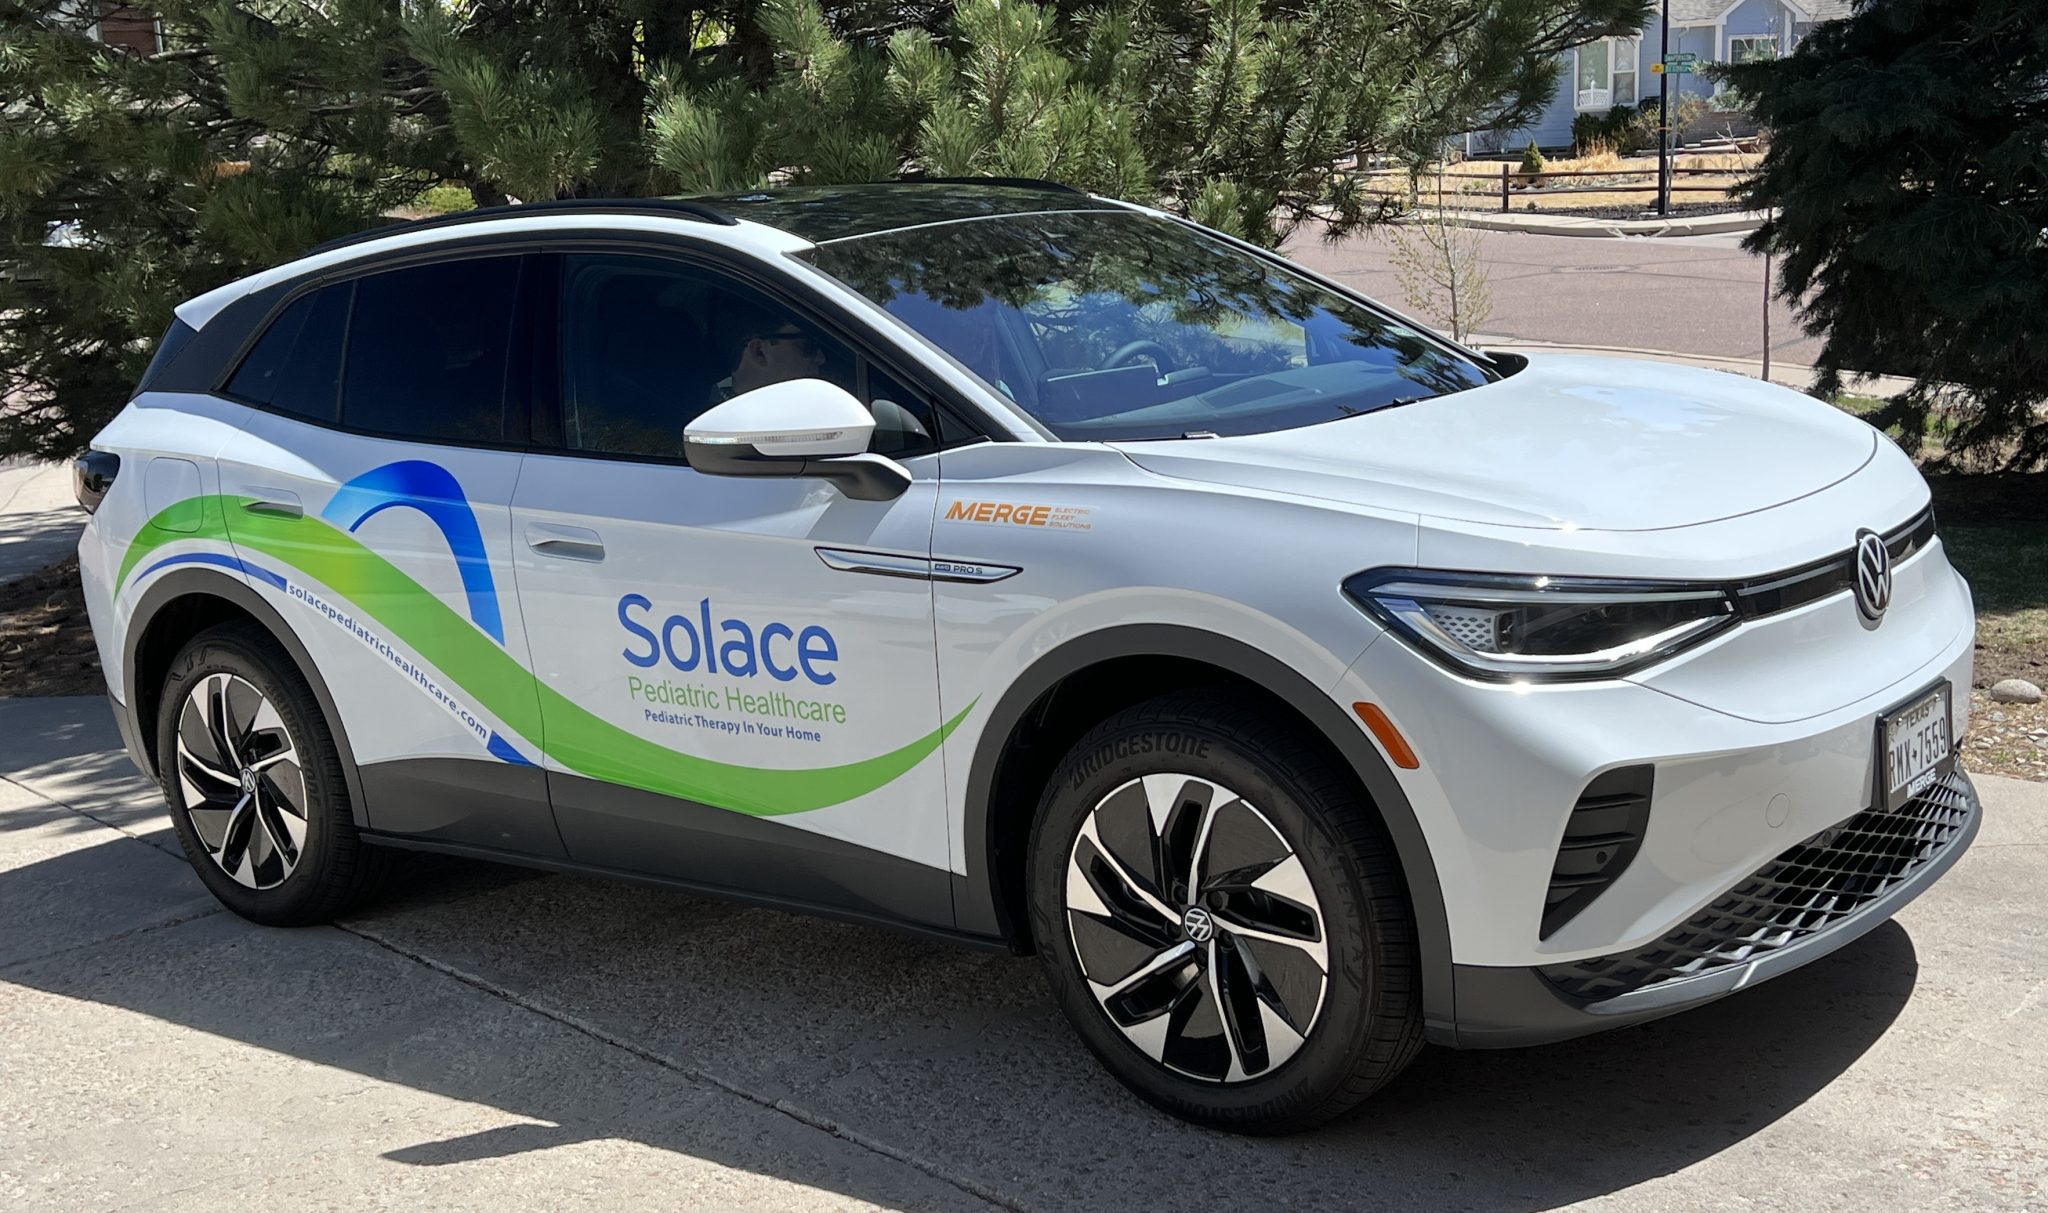 Solace Pediatric Healthcare is proud to partner with Merge Electric Fleet Solutions on a six-month pilot program.